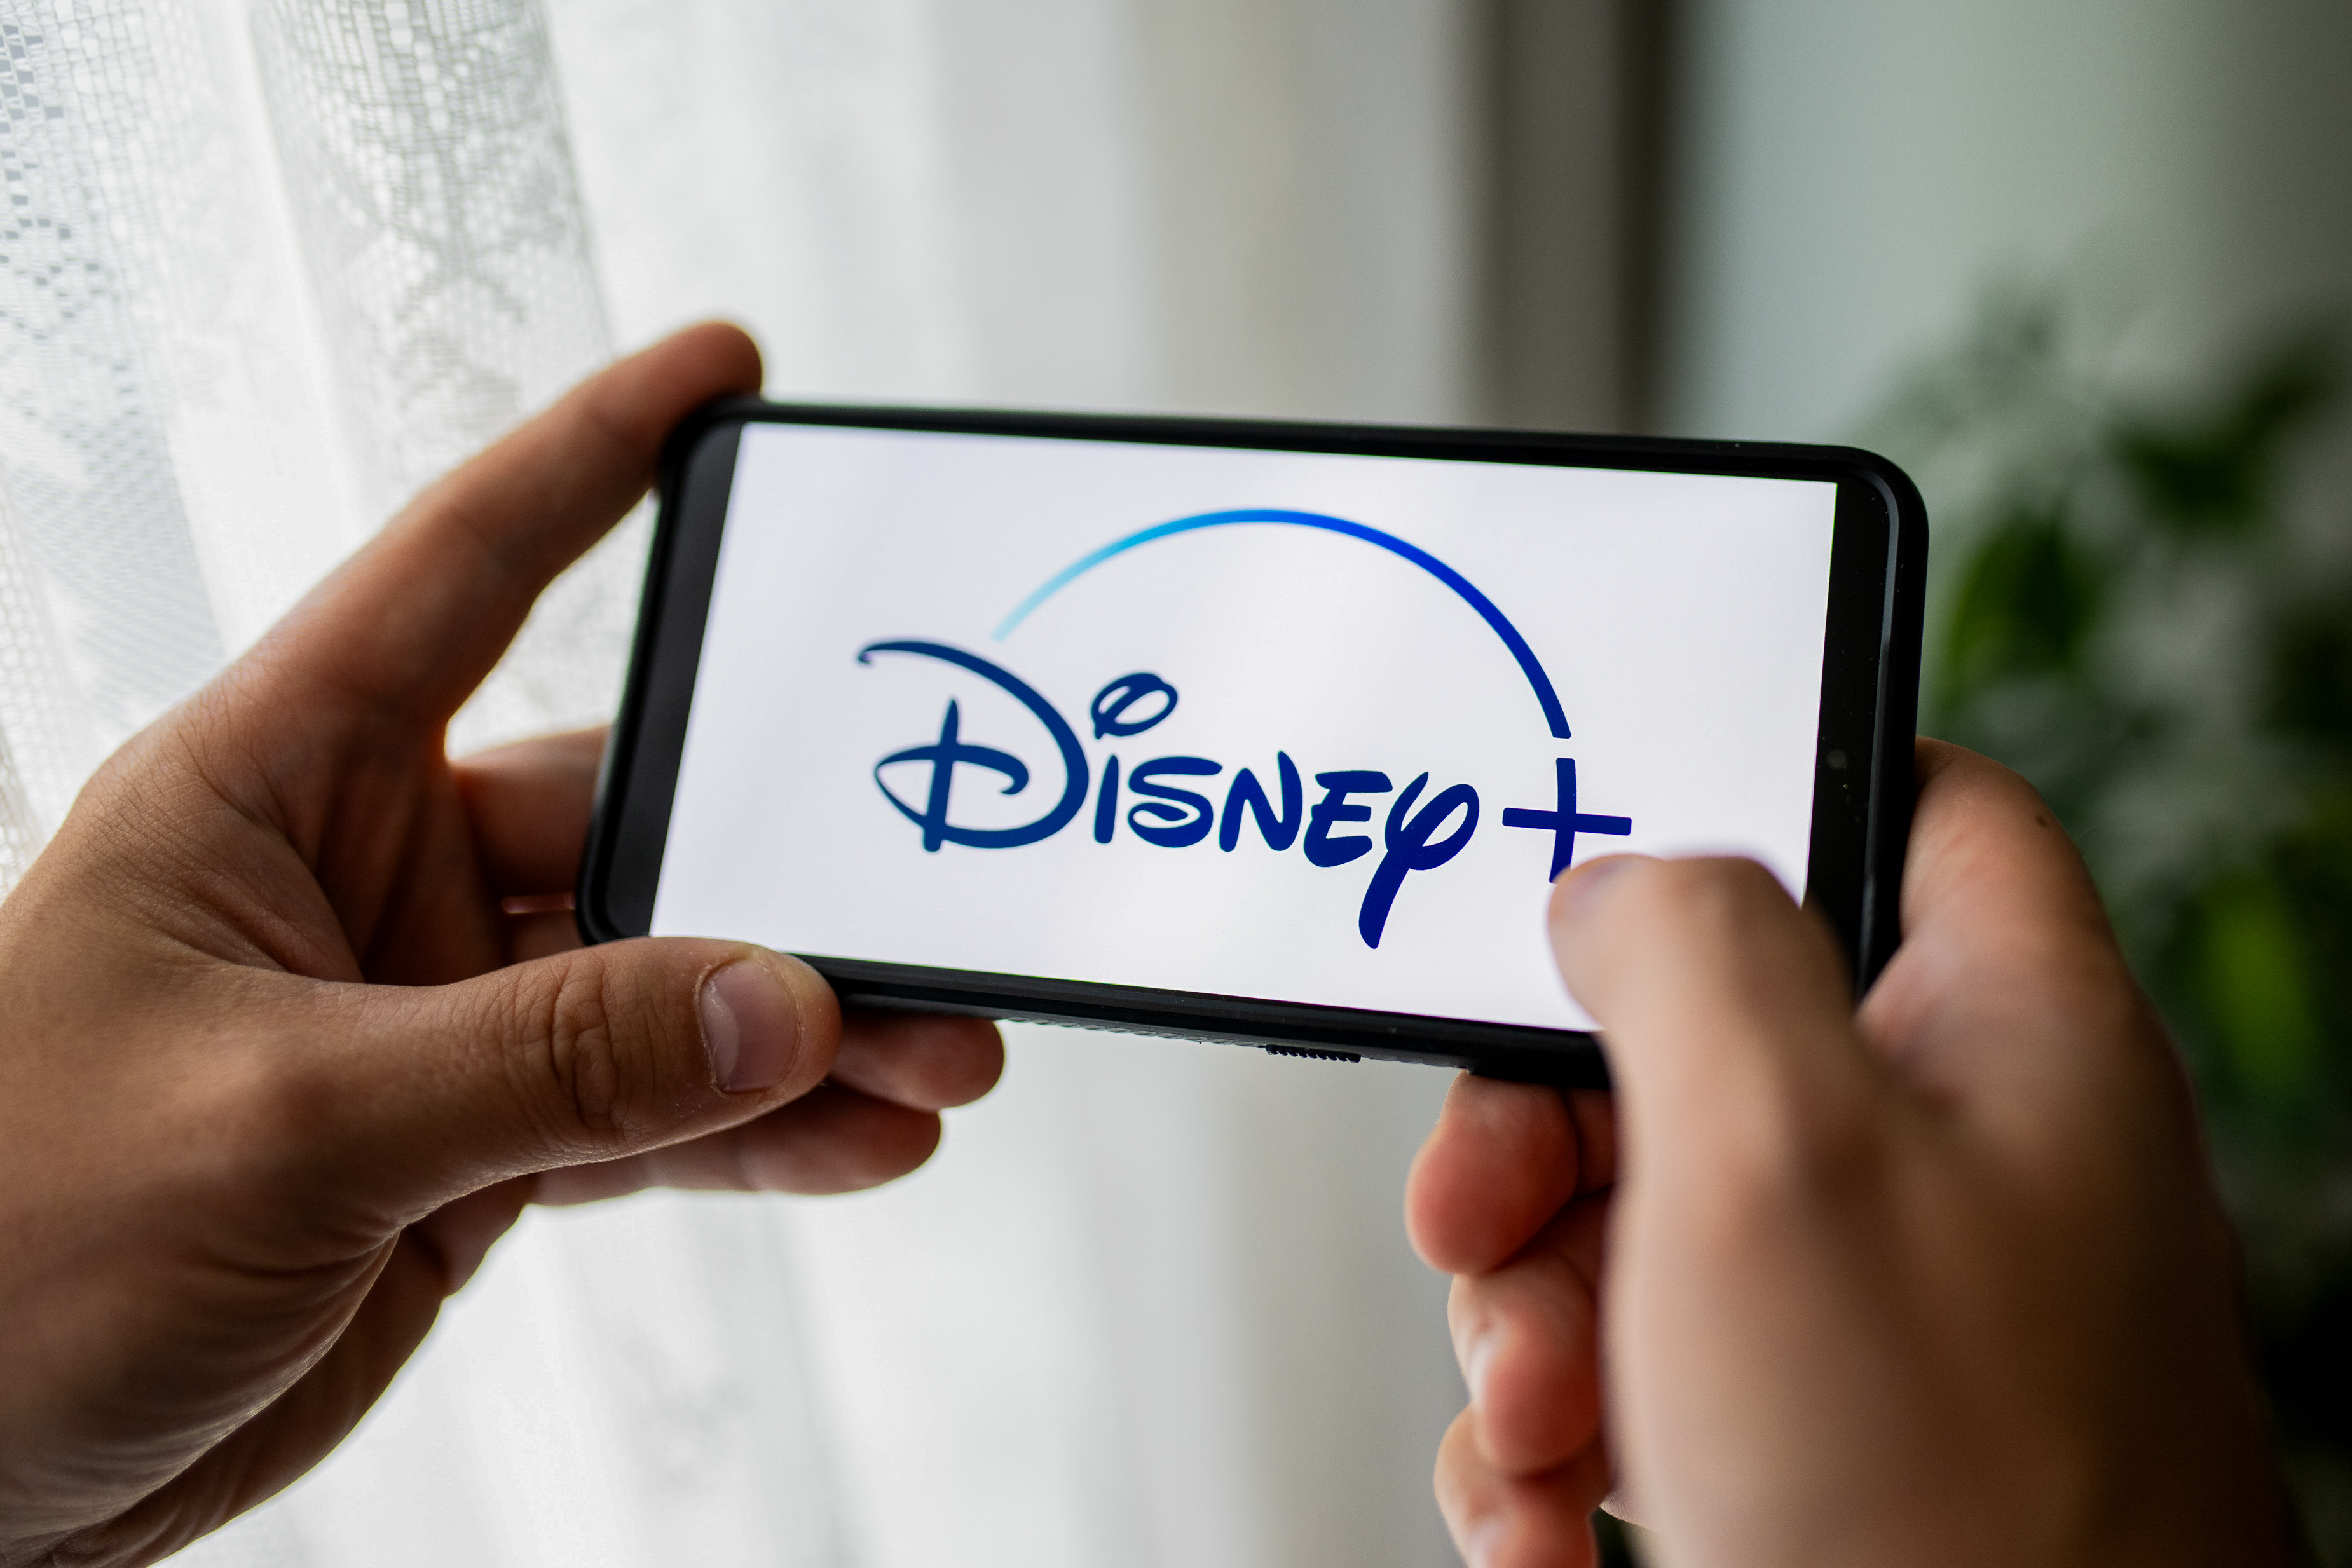 Disney Plus subscribers have an exclusive offer from Disney World